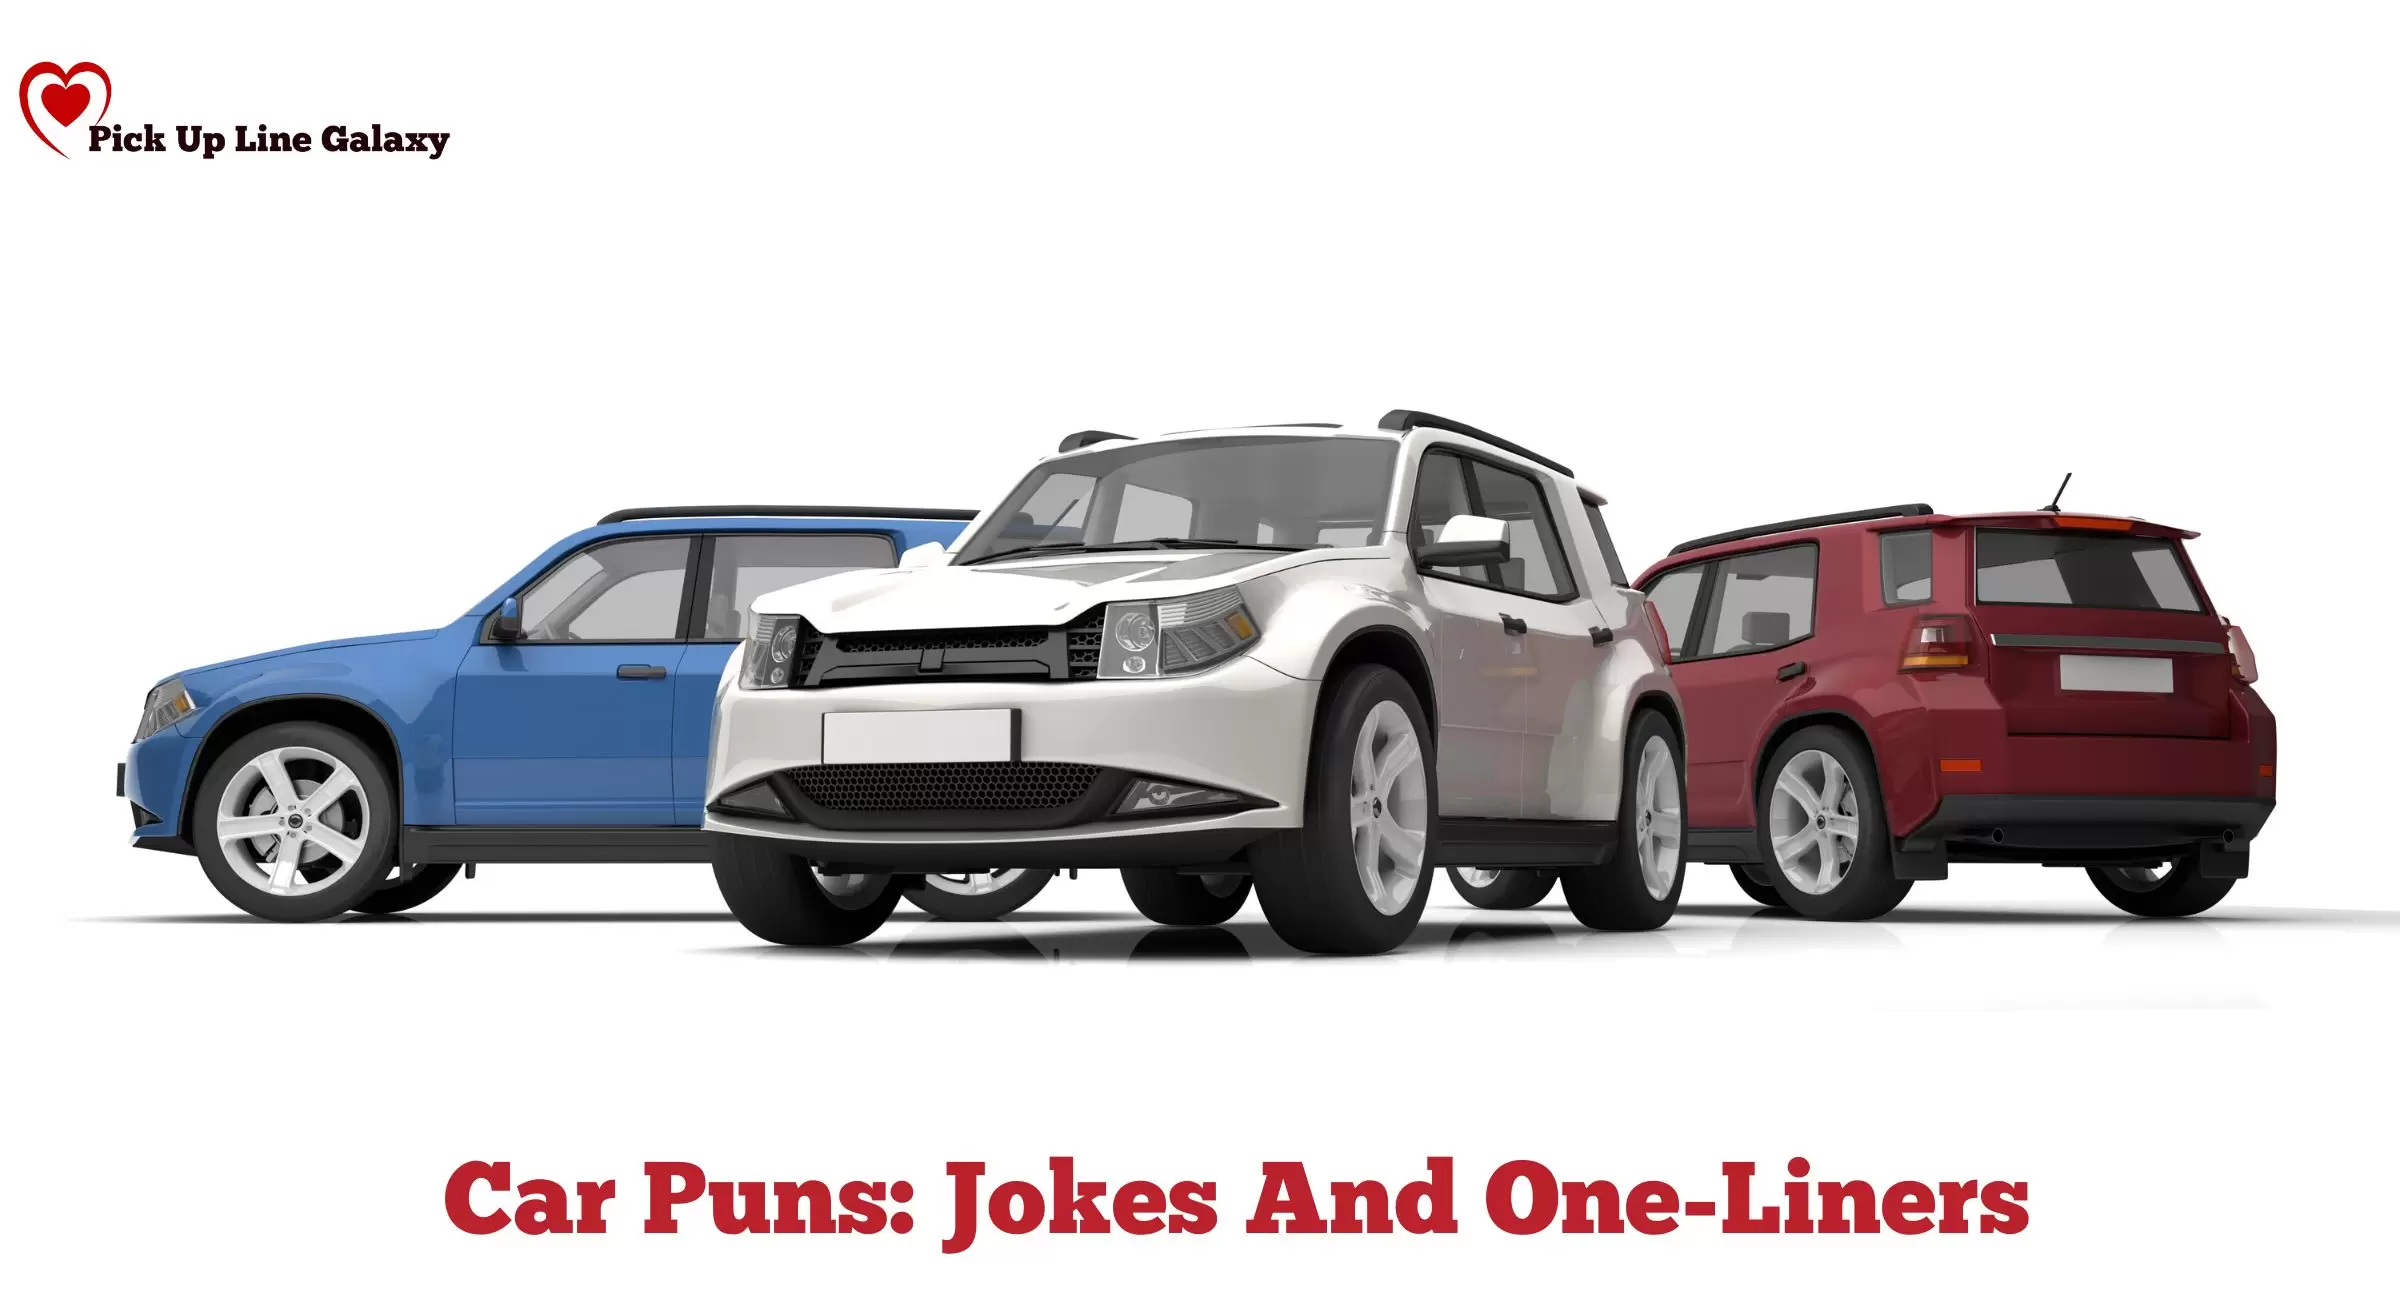 Car Puns: Jokes And One-Liners